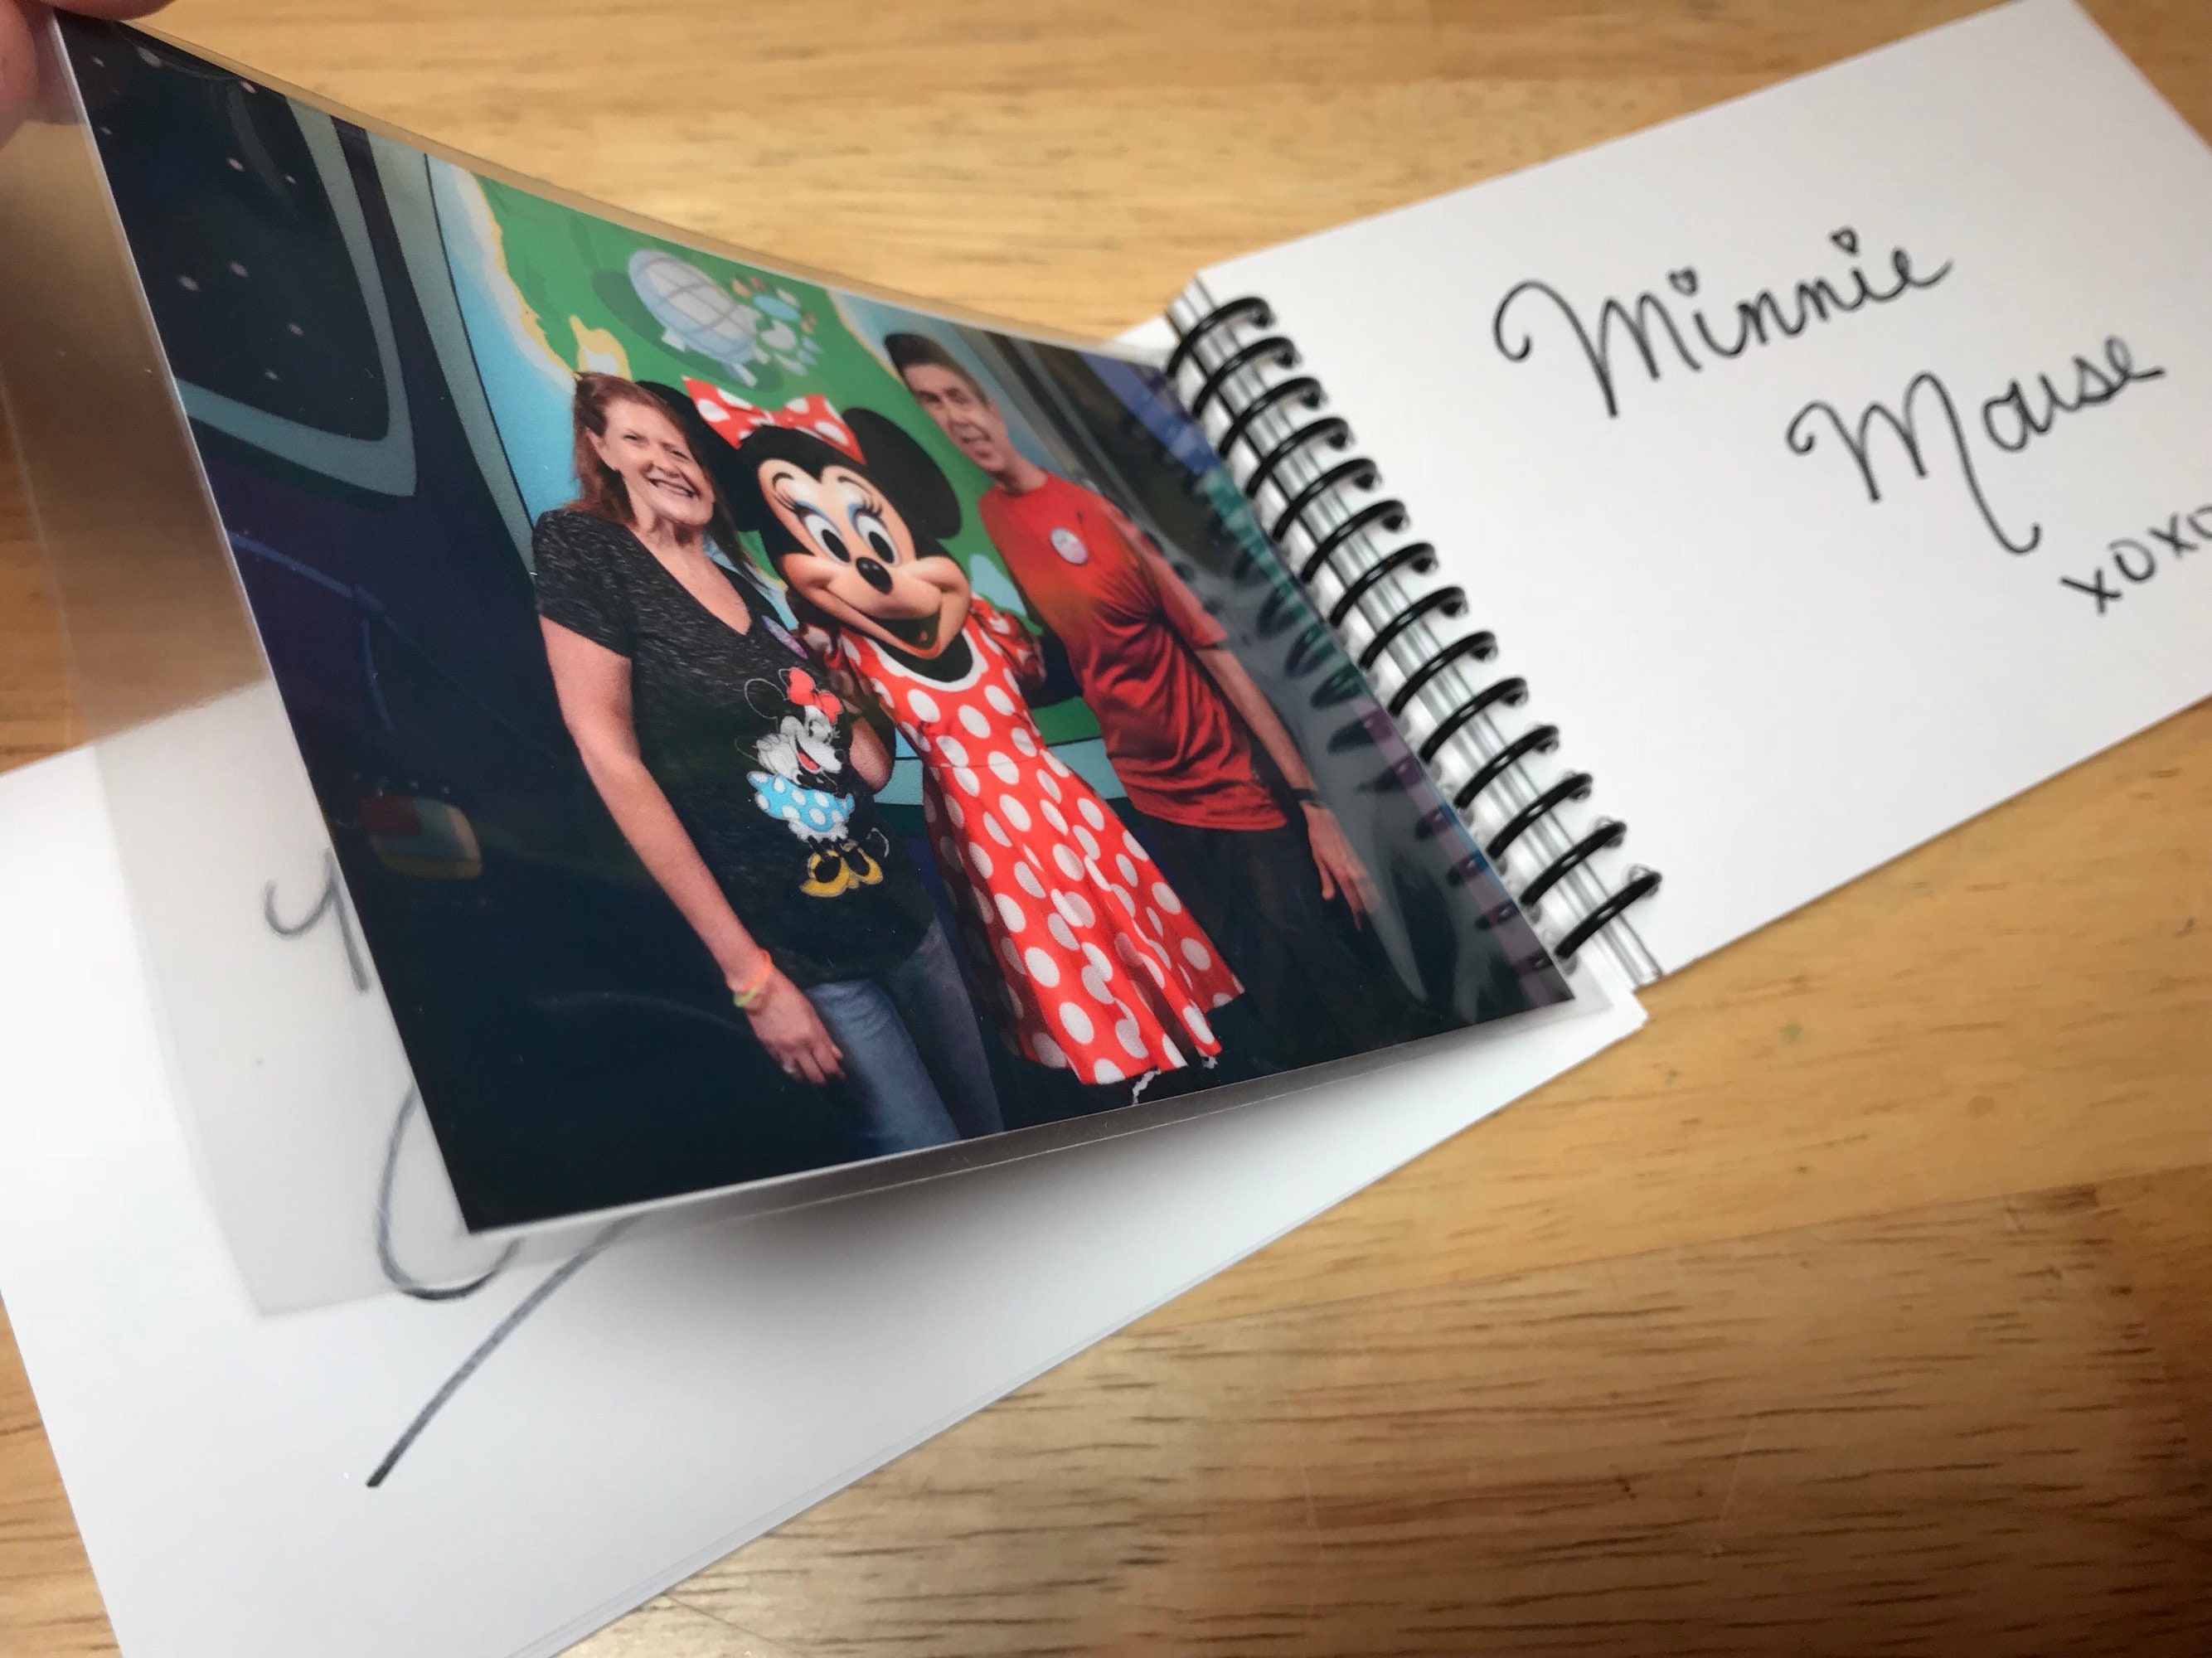 Disney Autograph Book With Photo Pages 4x6 Book 30 Blank Card Stock Pages  W/15 Photo Sleeves That Hold 30 Photos Holds 3.5 Photos 